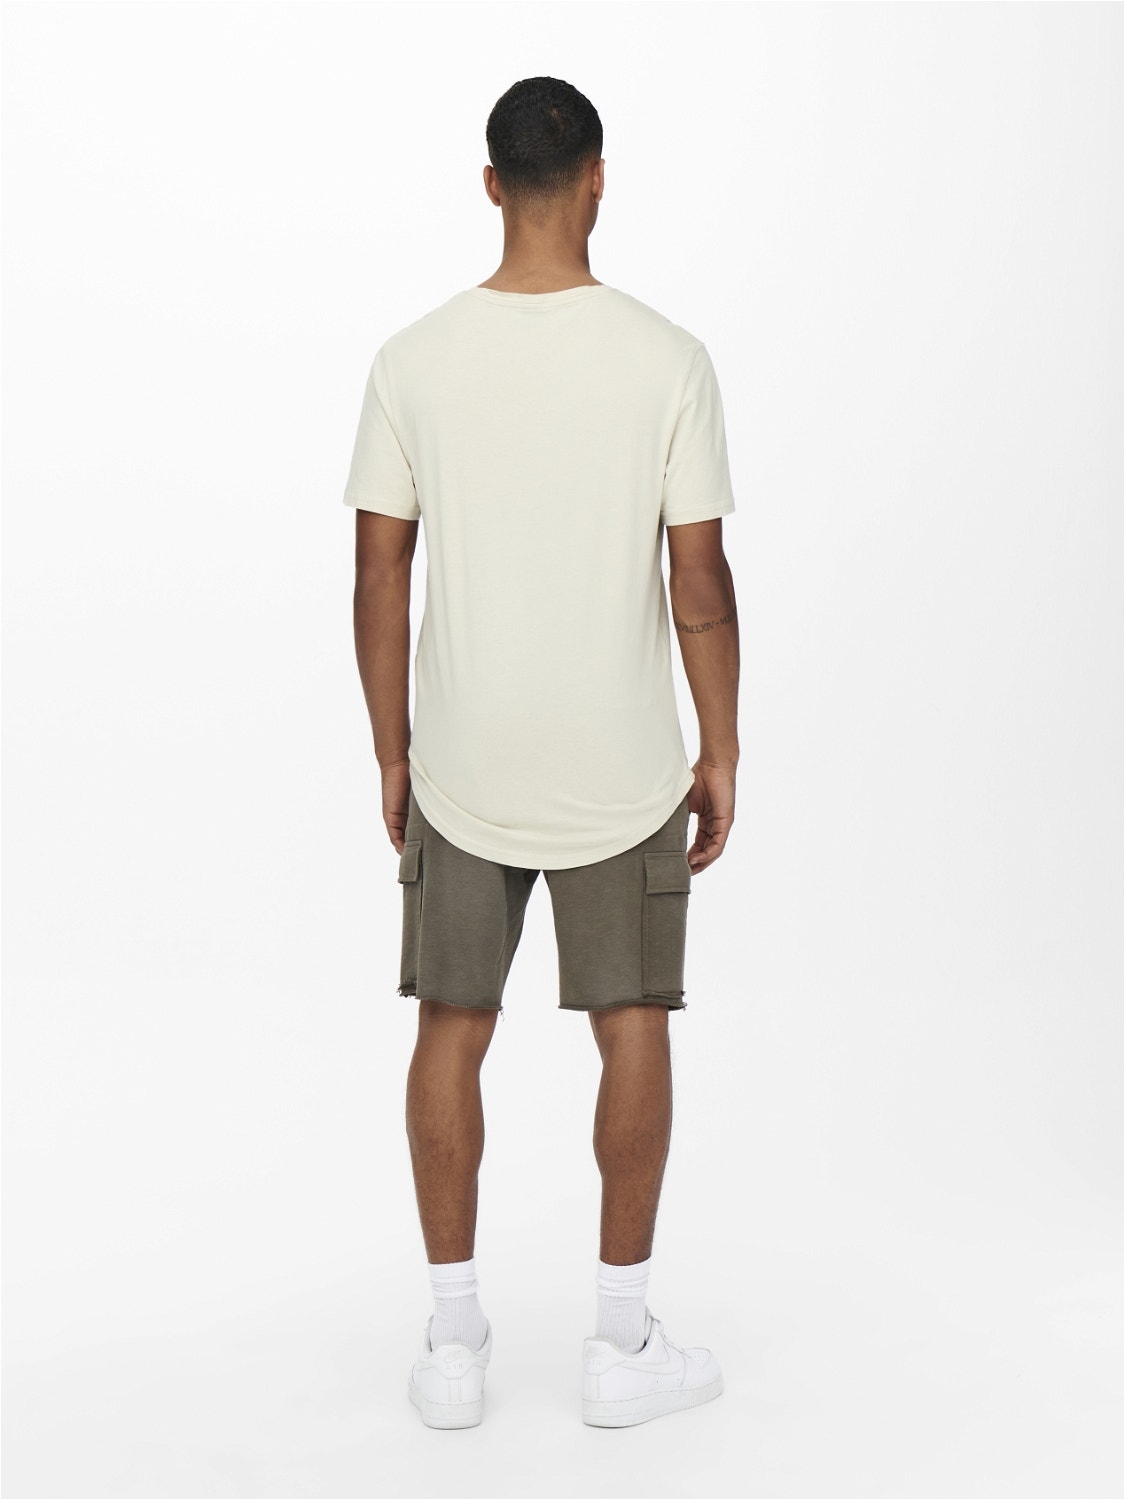 ONLY & SONS Long Line Fit Round Neck T-Shirt -Pelican - 22002973